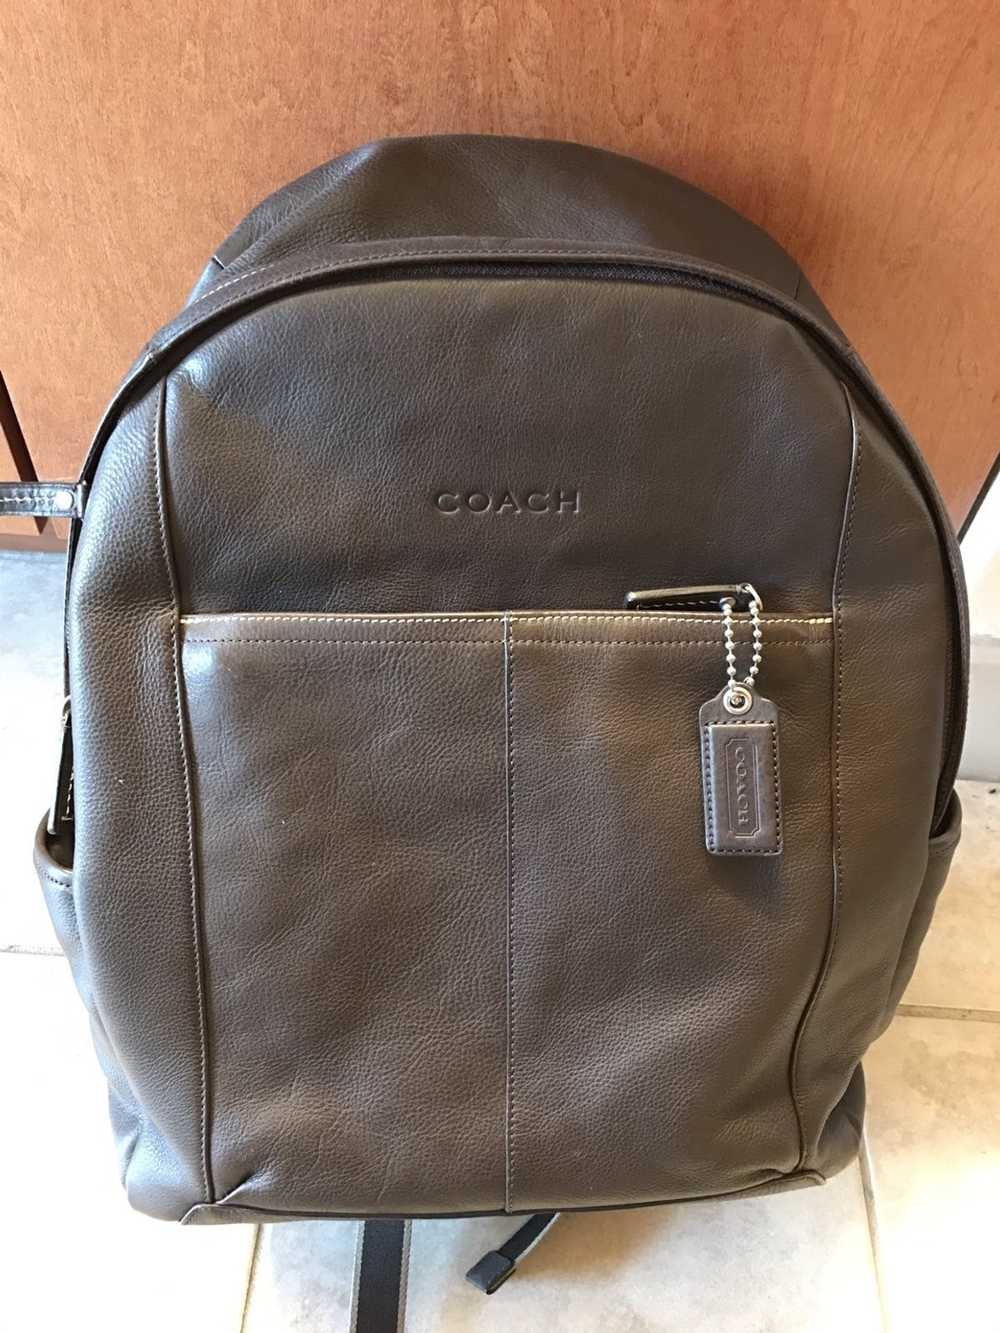 Coach Leather Backpack - image 1